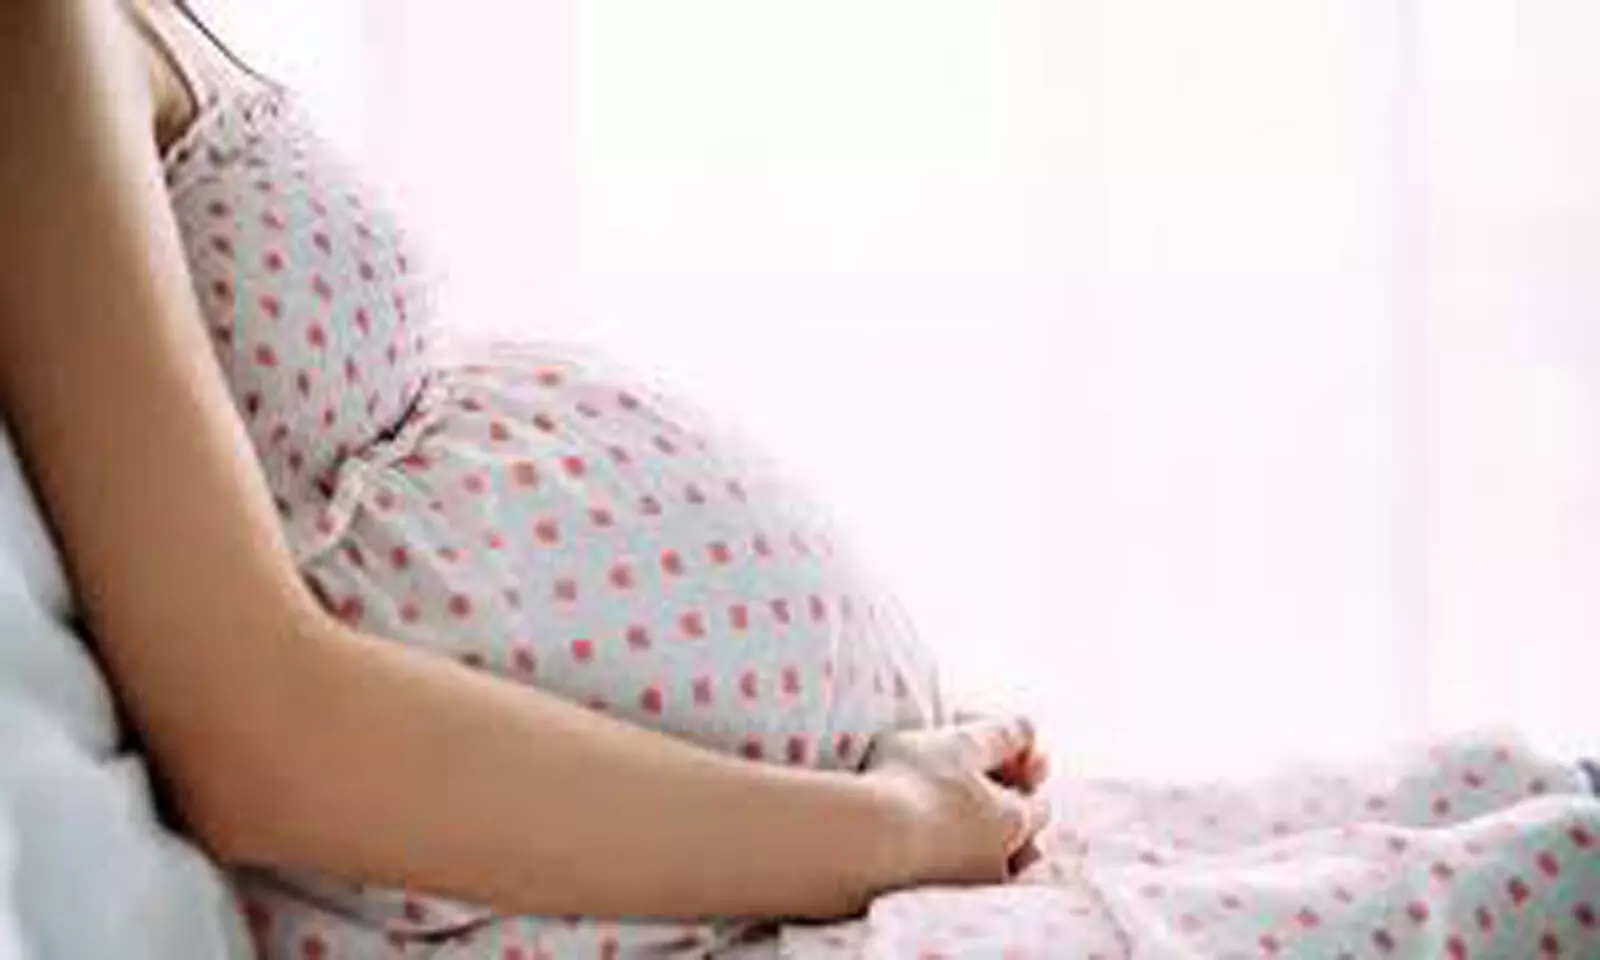 Pregnant women with COVID-19 more likely to need ICU care and  have preterm birth